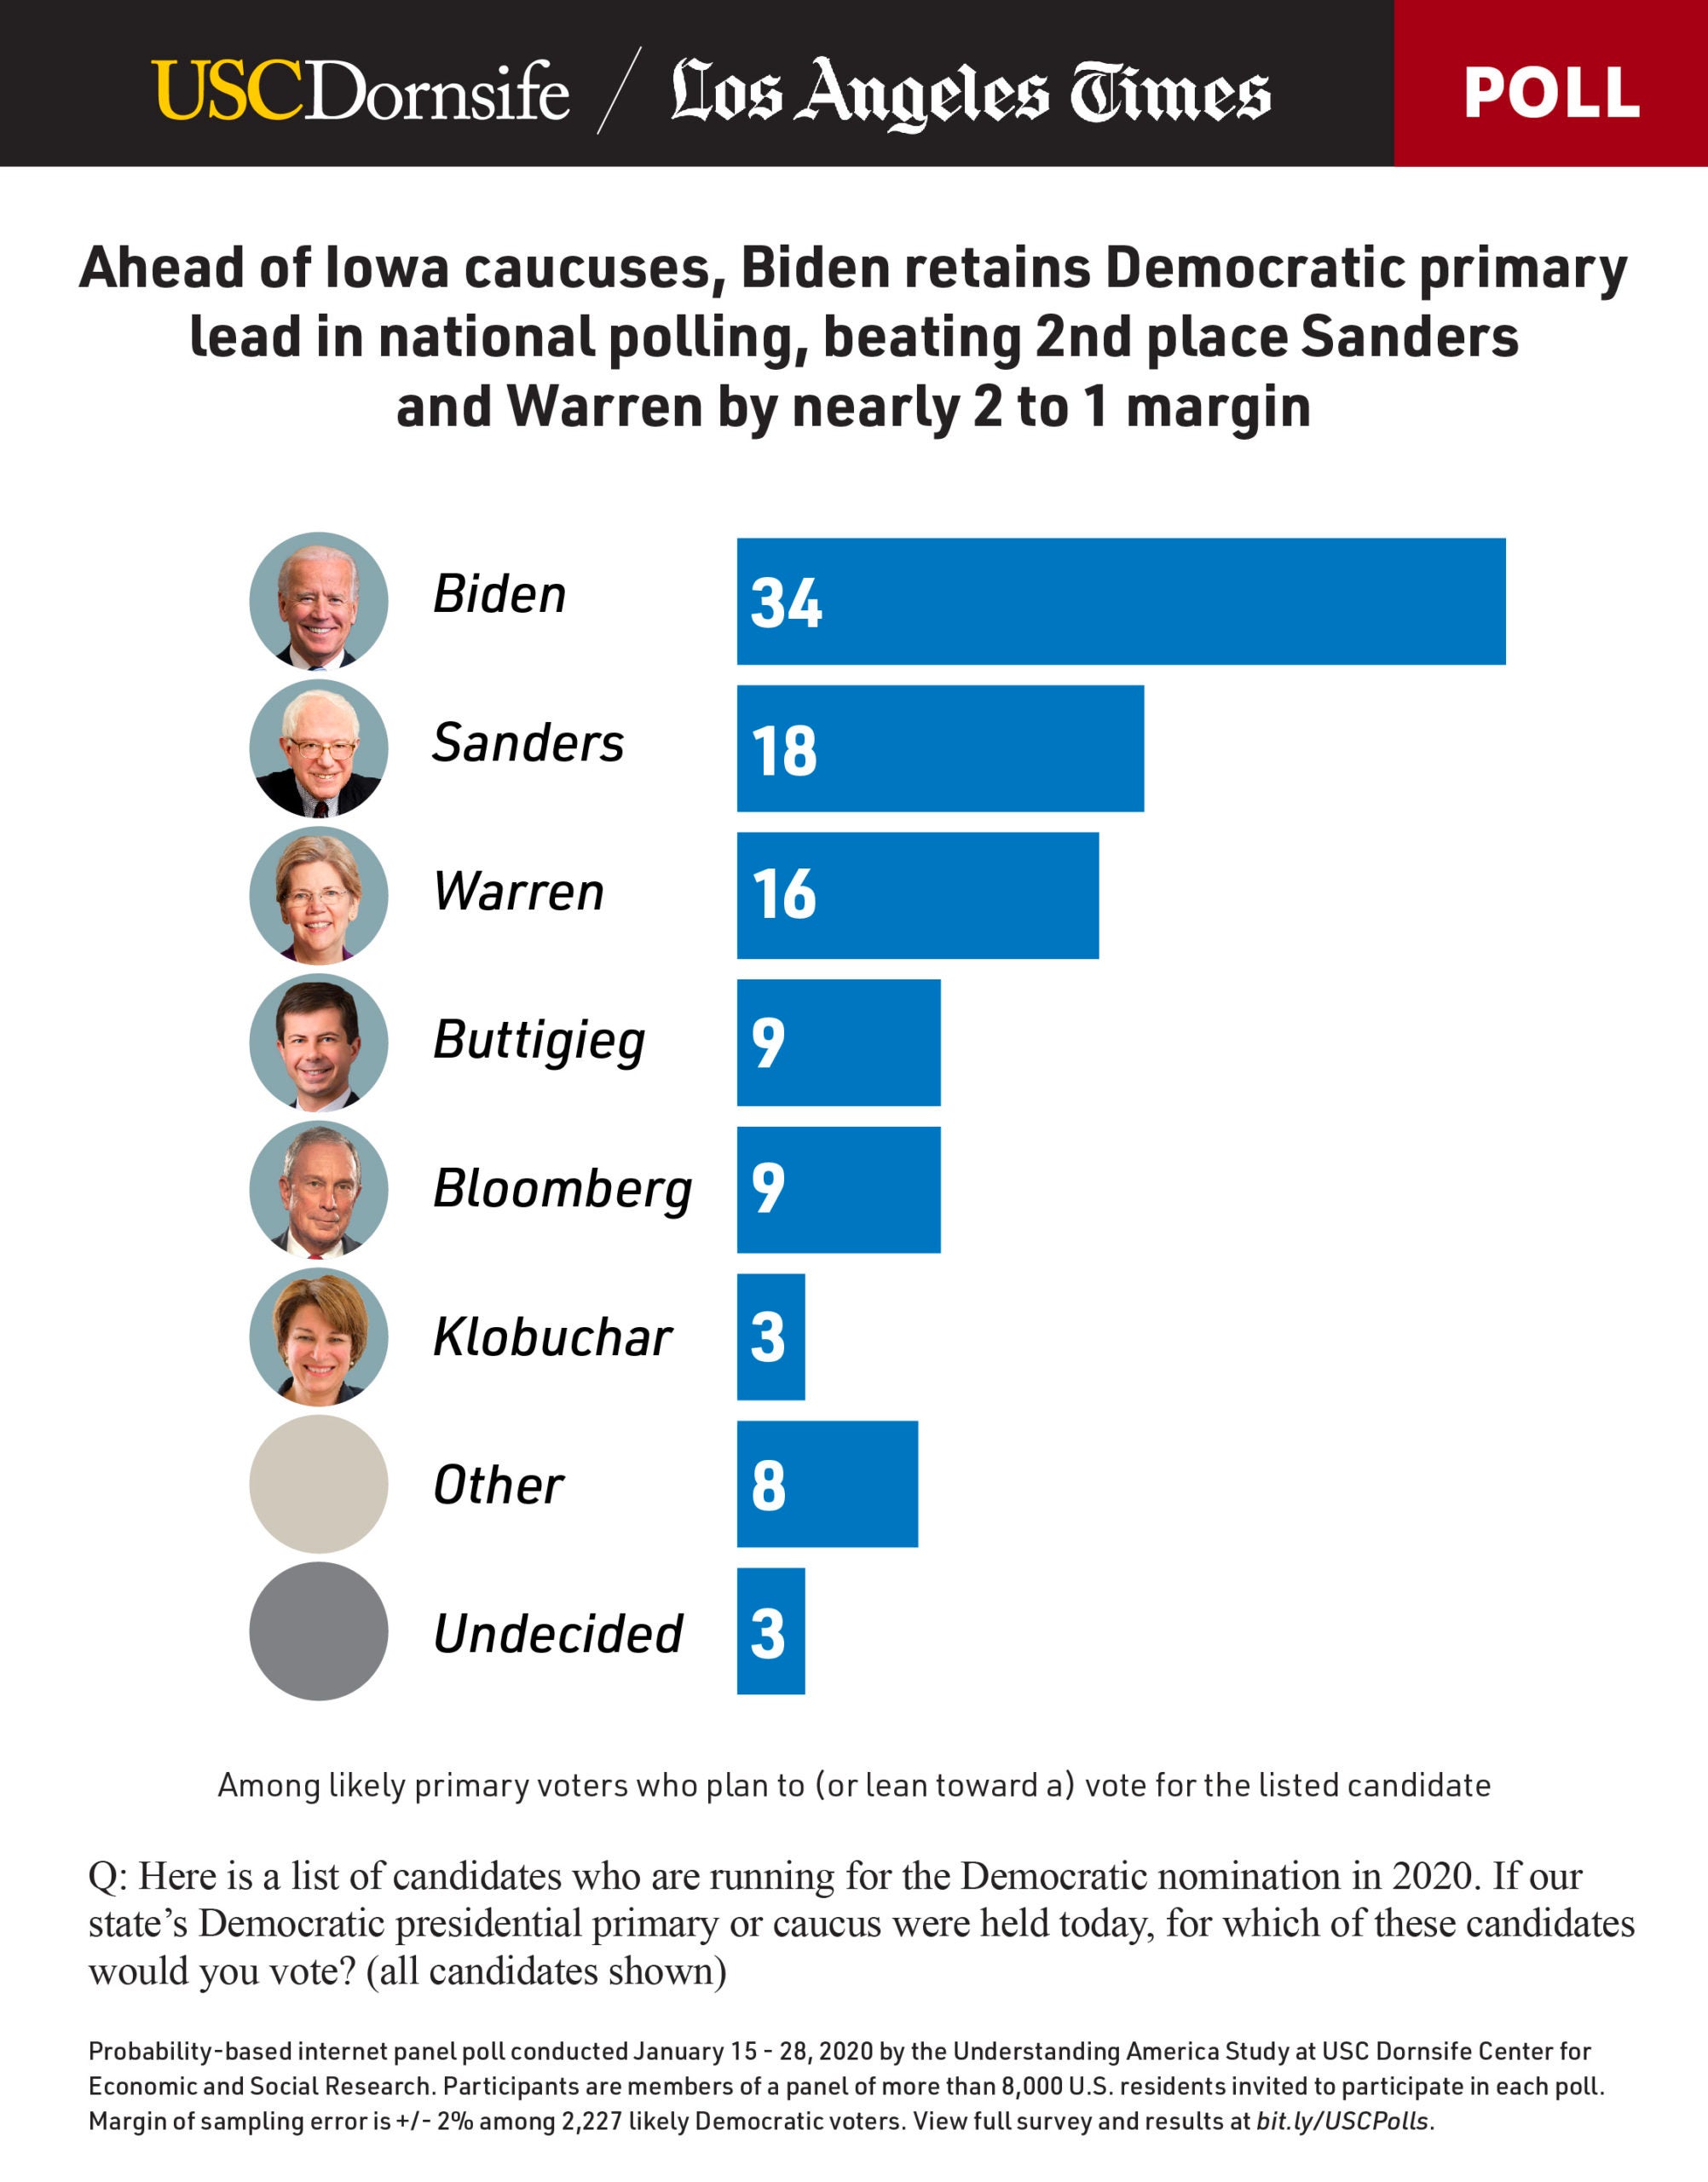 Graphic showing Democratic candidate poll numbers